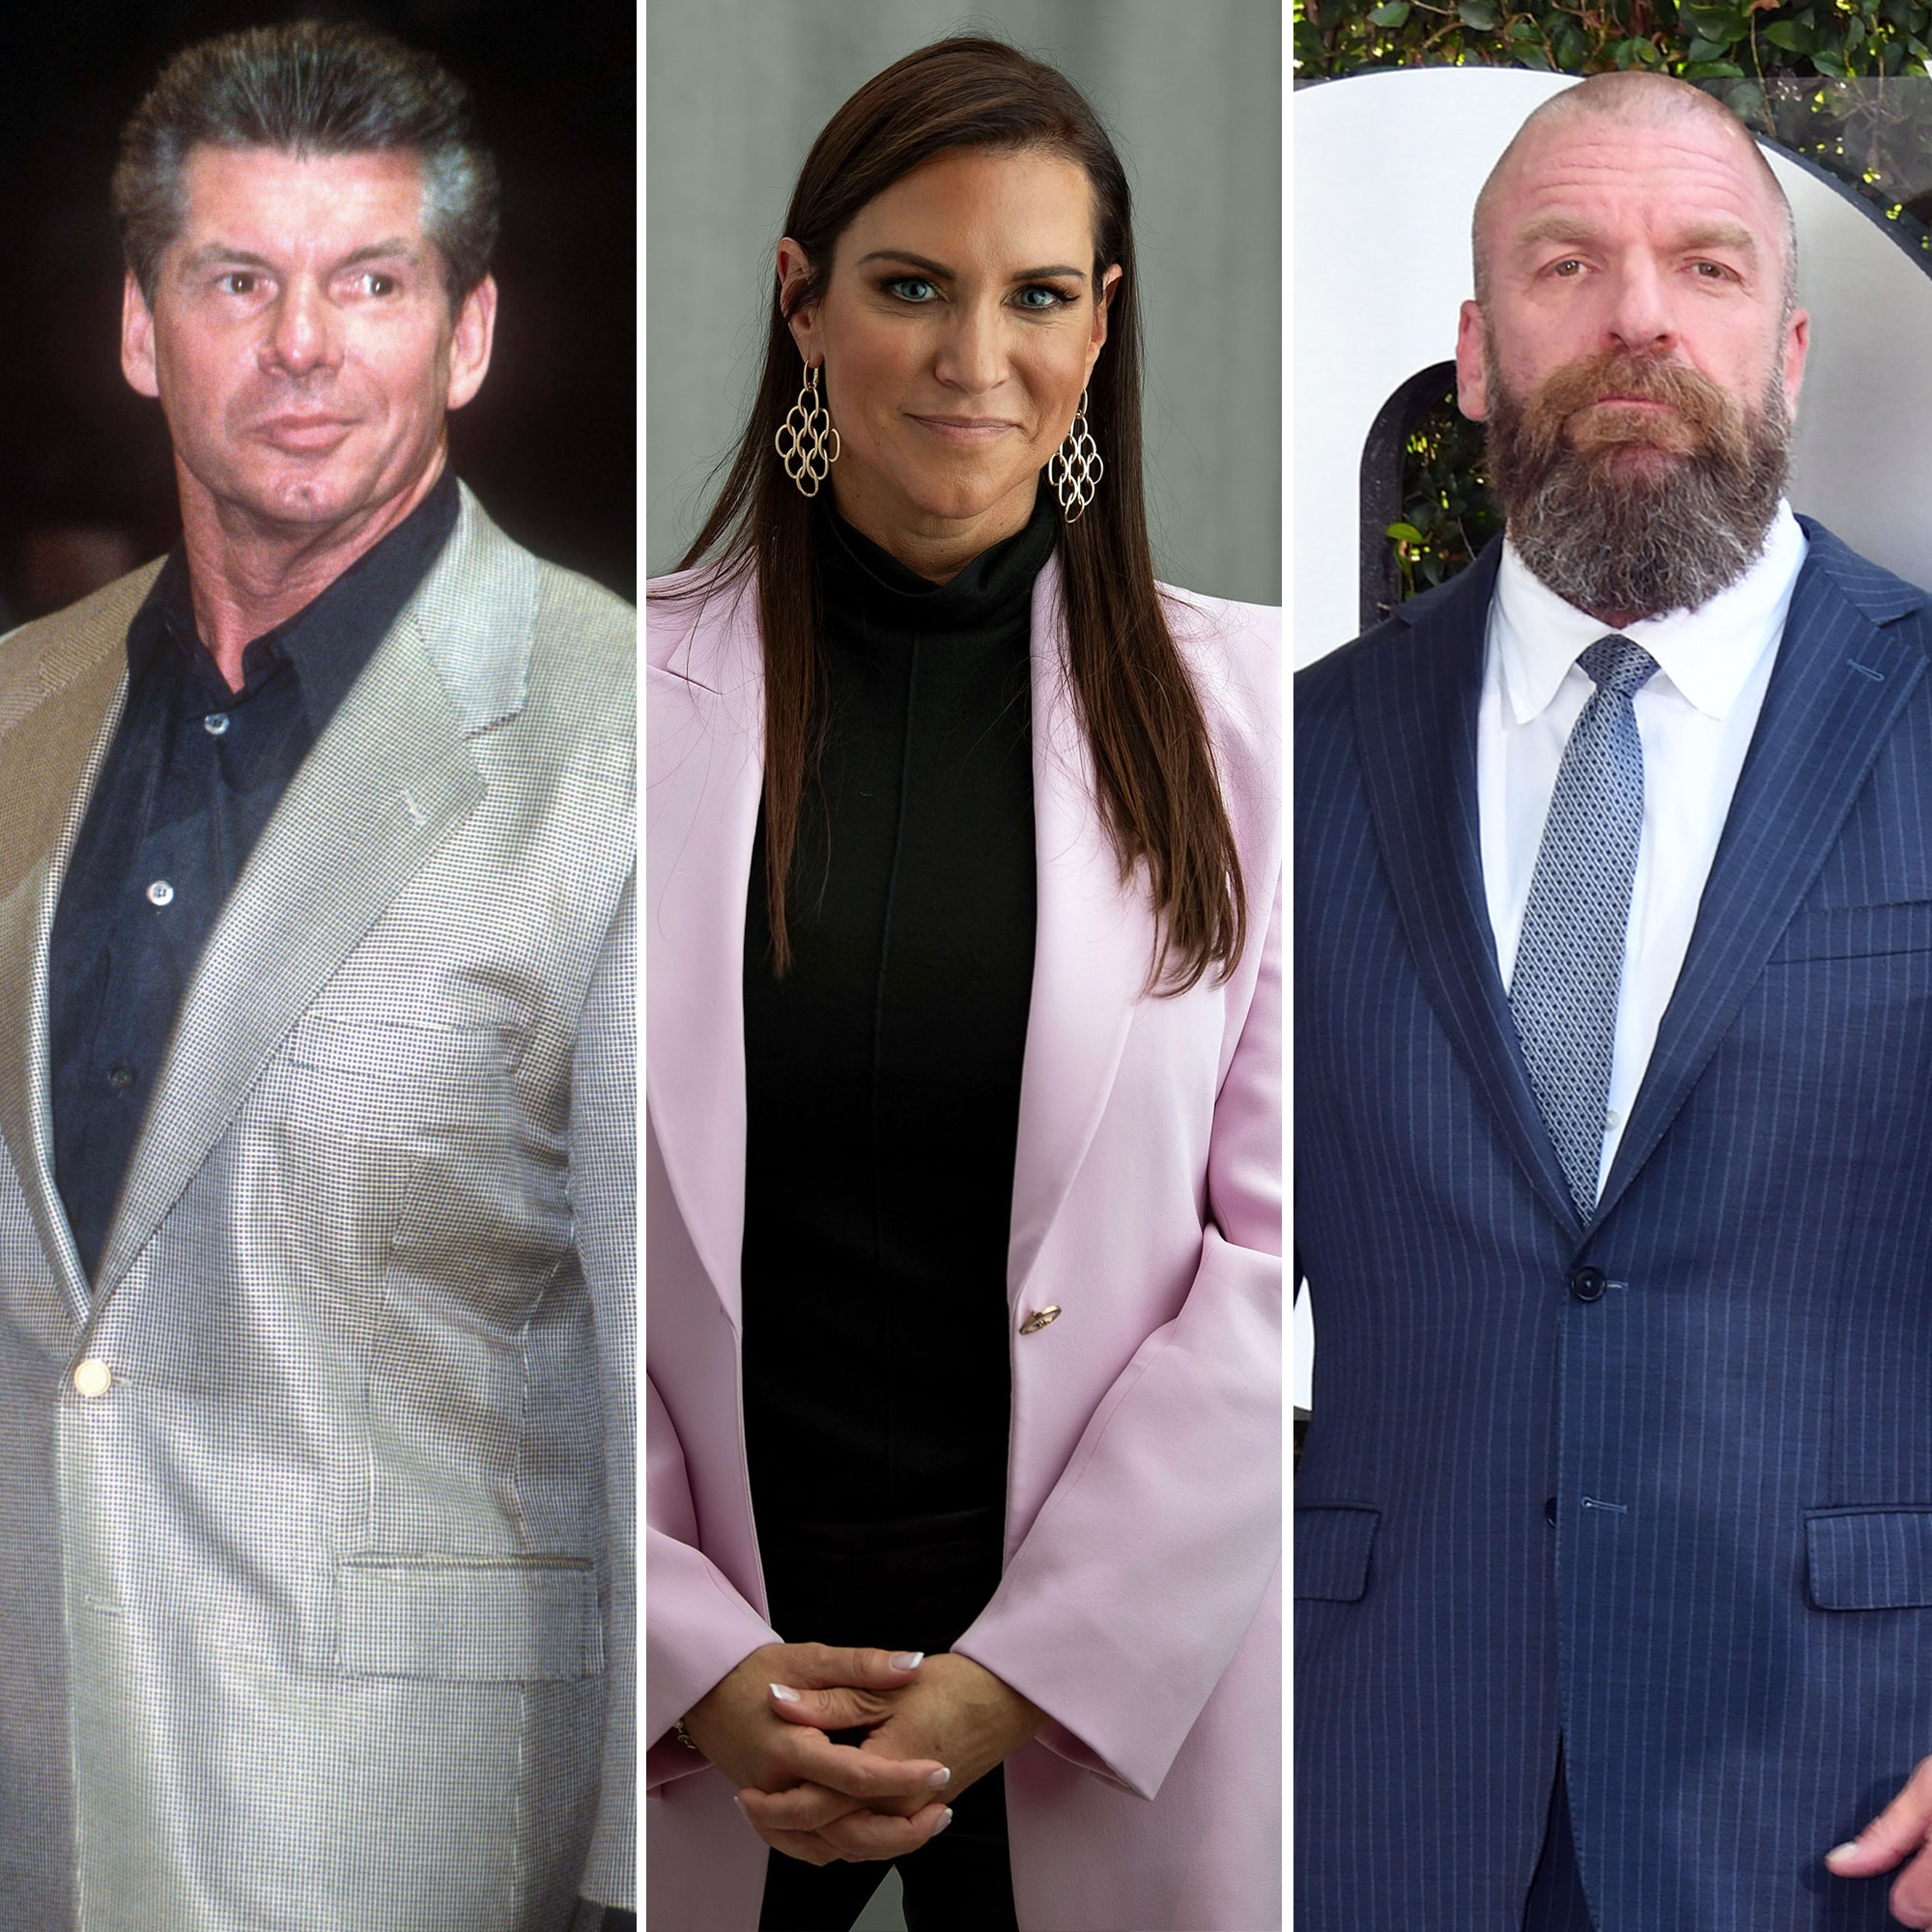 WWEs McMahon Family A Guide to Vince, Stephanie, Triple H, More pic